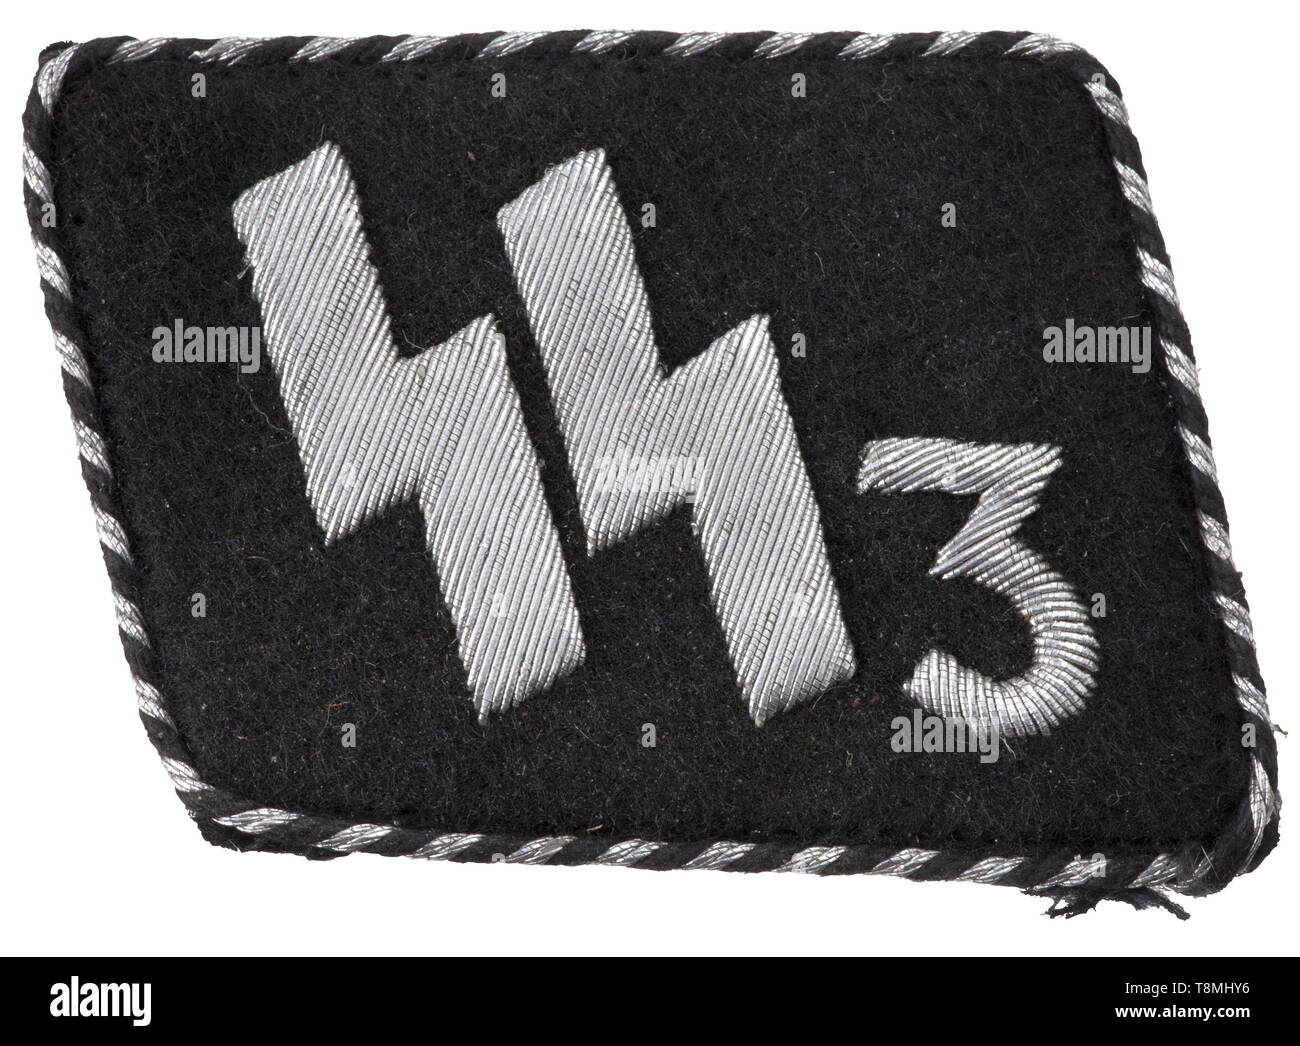 A collar patch for an SS leader of the 3rd SS-Standarte 'Der Führer' Hand-embroidered '3' and SS runes in silver wire thread, continuous black-silver corded trim, the reverse with an SS/RZM-paper tag. historic, historical, 20th century, 1930s, 1940s, Waffen-SS, armed division of the SS, armed service, armed services, NS, National Socialism, Nazism, Third Reich, German Reich, Germany, military, militaria, utensil, piece of equipment, utensils, object, objects, stills, clipping, clippings, cut out, cut-out, cut-outs, fascism, fascistic, National Socialist, Nazi, Nazi period, Editorial-Use-Only Stock Photo